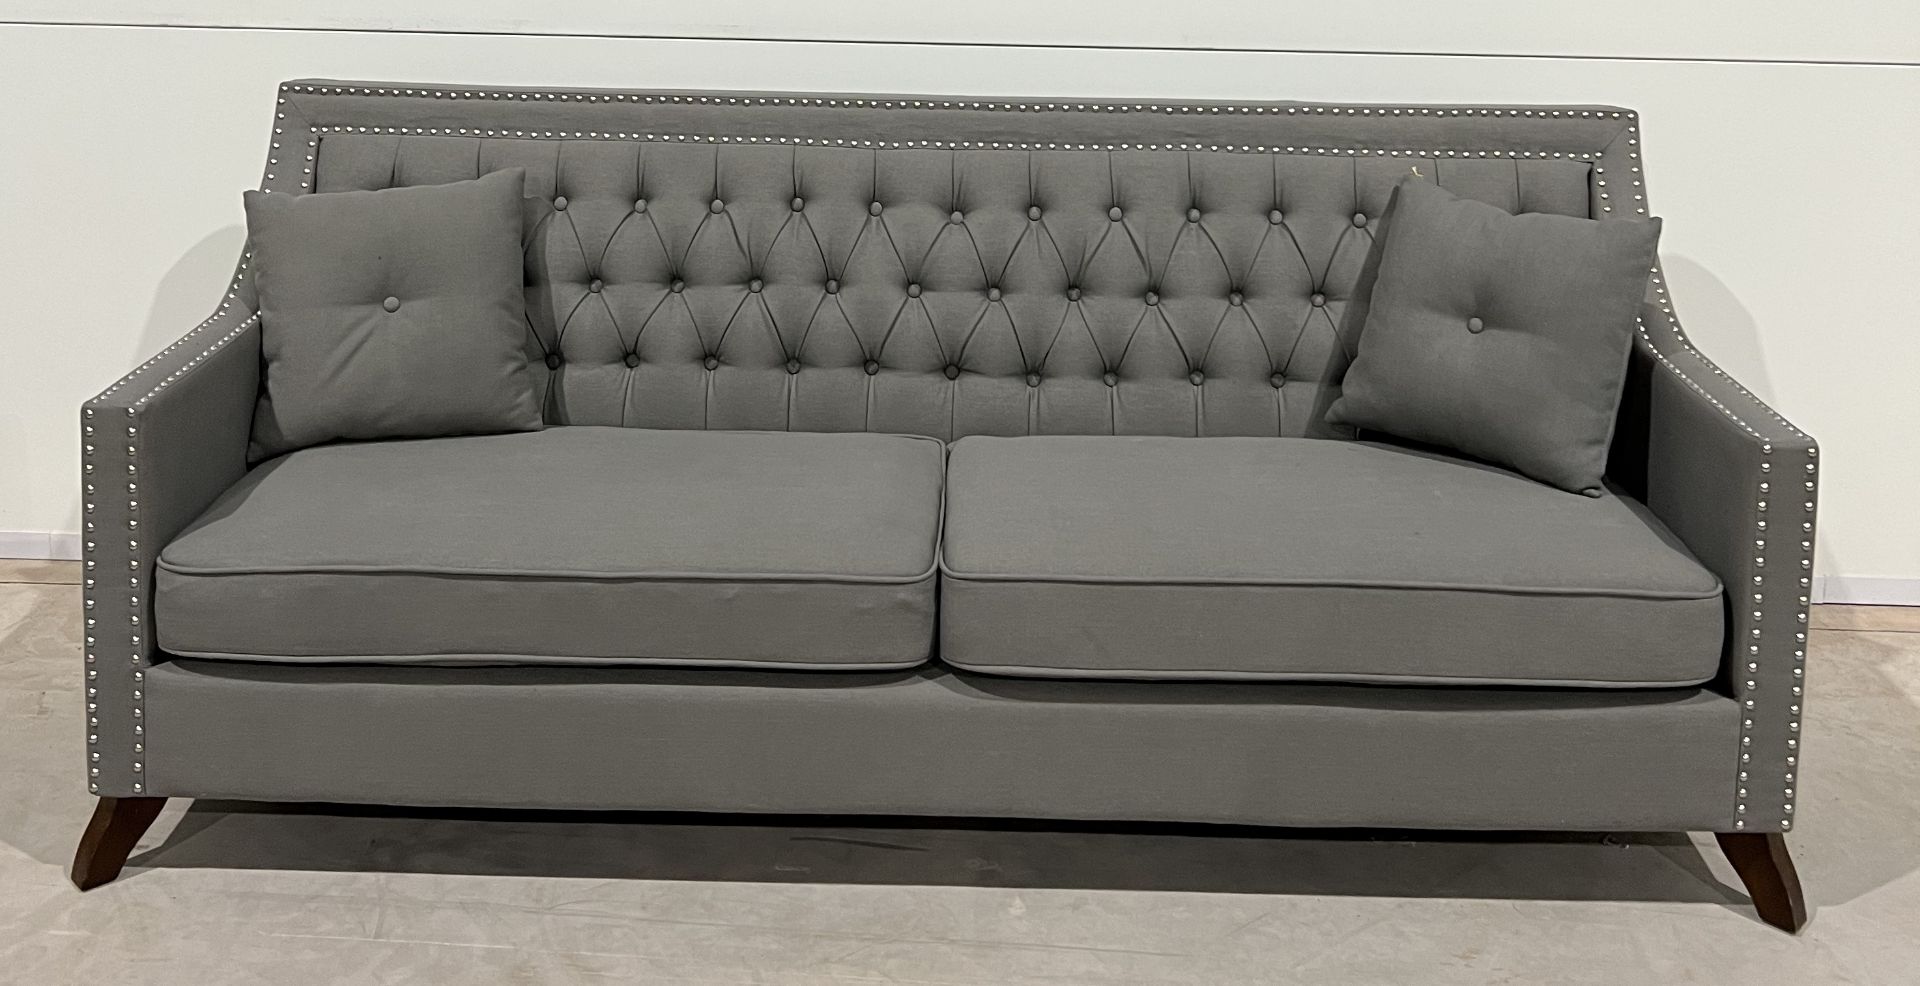 Chatsworth Grey Plush Fabric Sofa Offering A Decidedly Modern Take On The Classic Chesterfield - Image 2 of 3